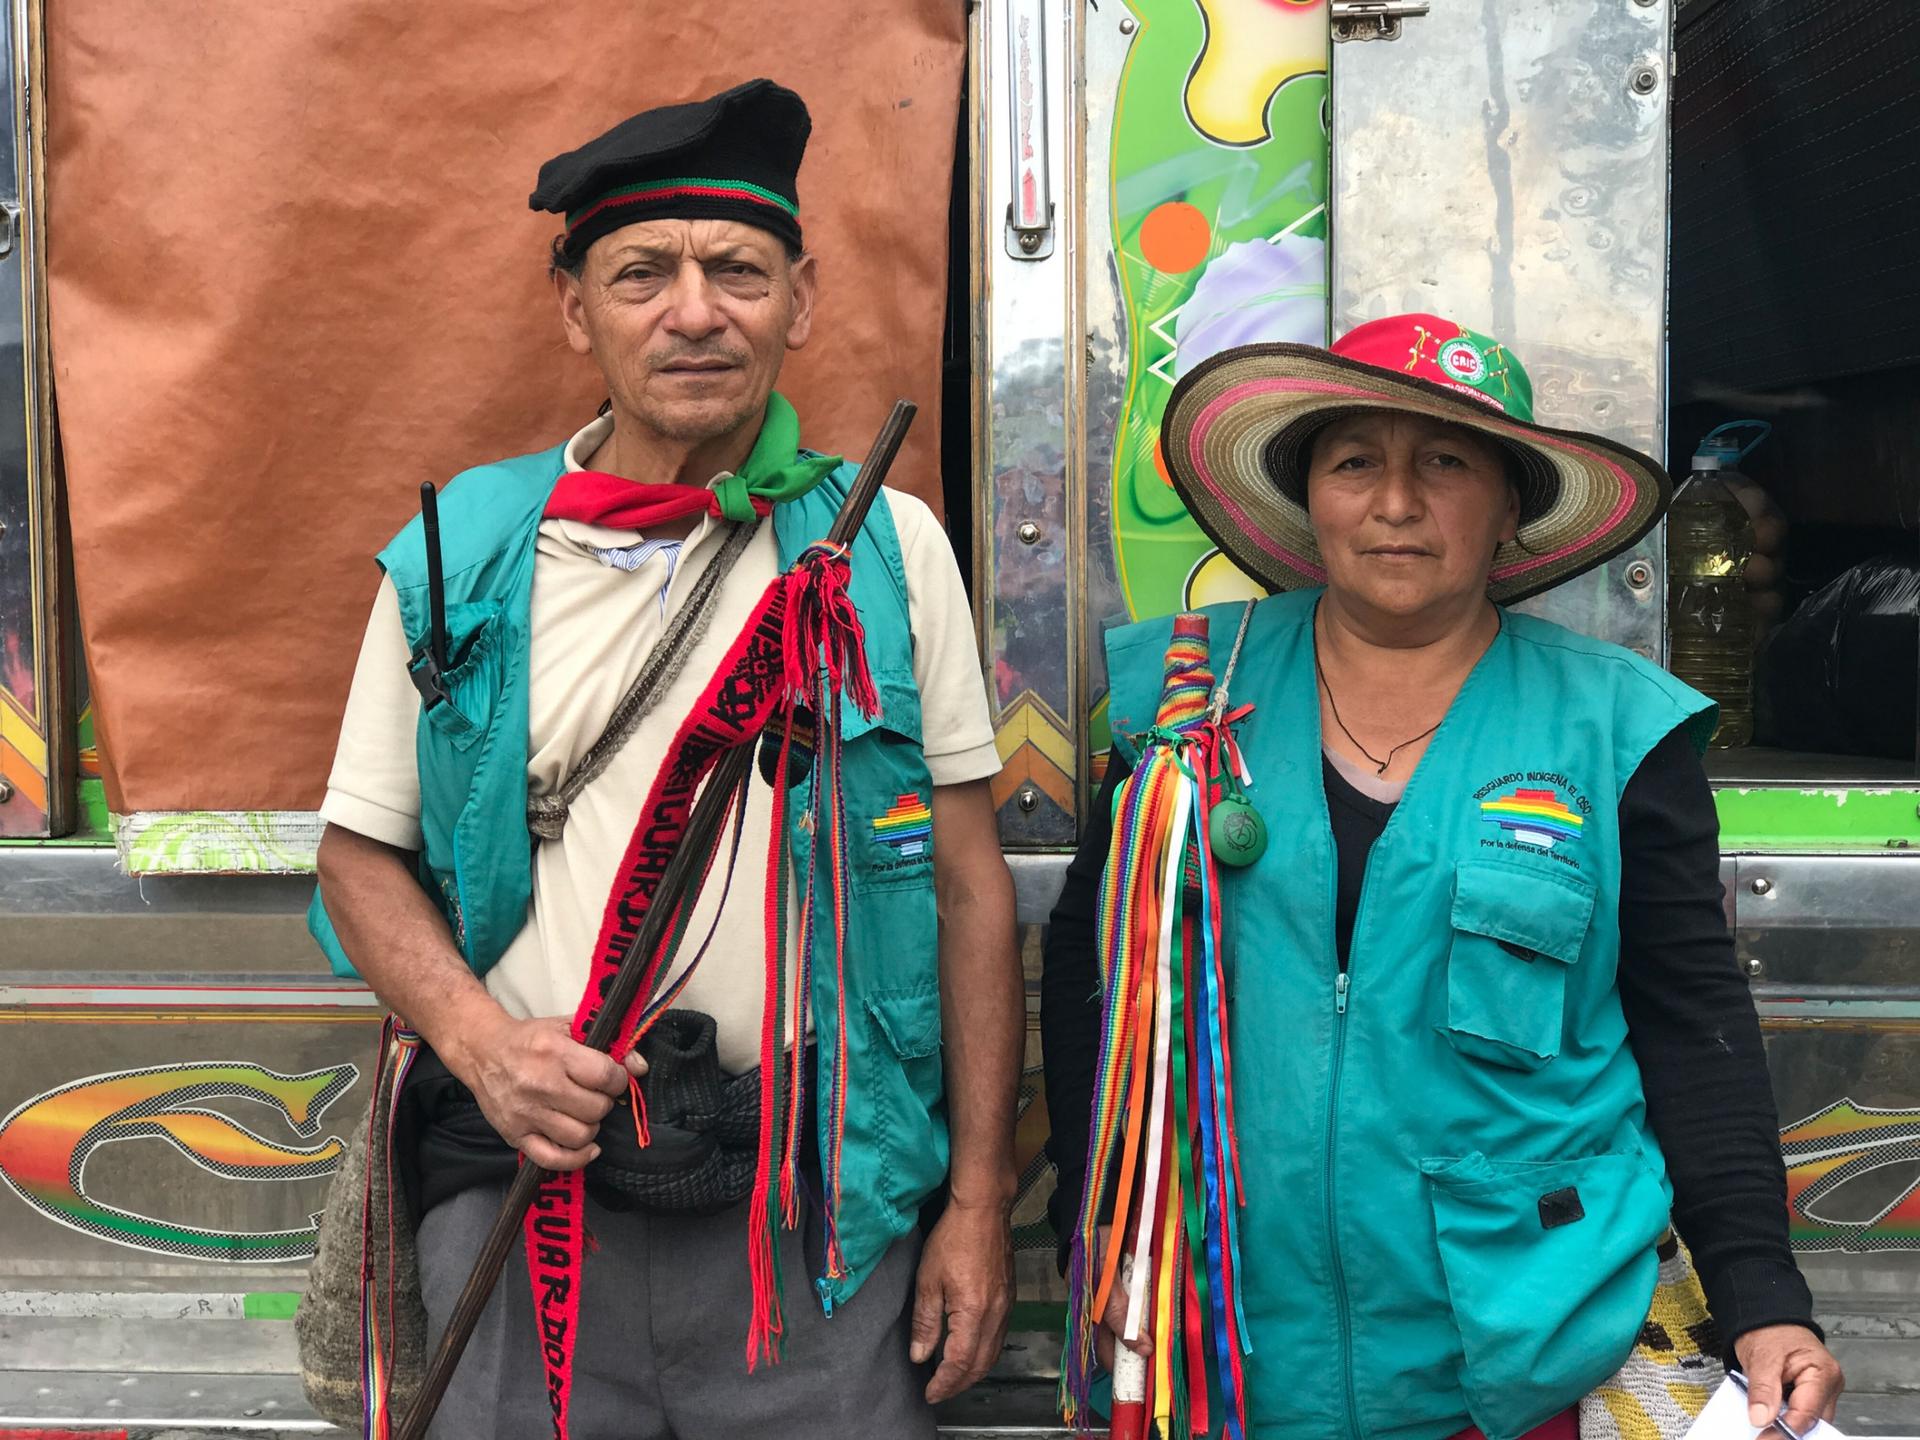 An older Indigenous couple is shown both wearing green vests.